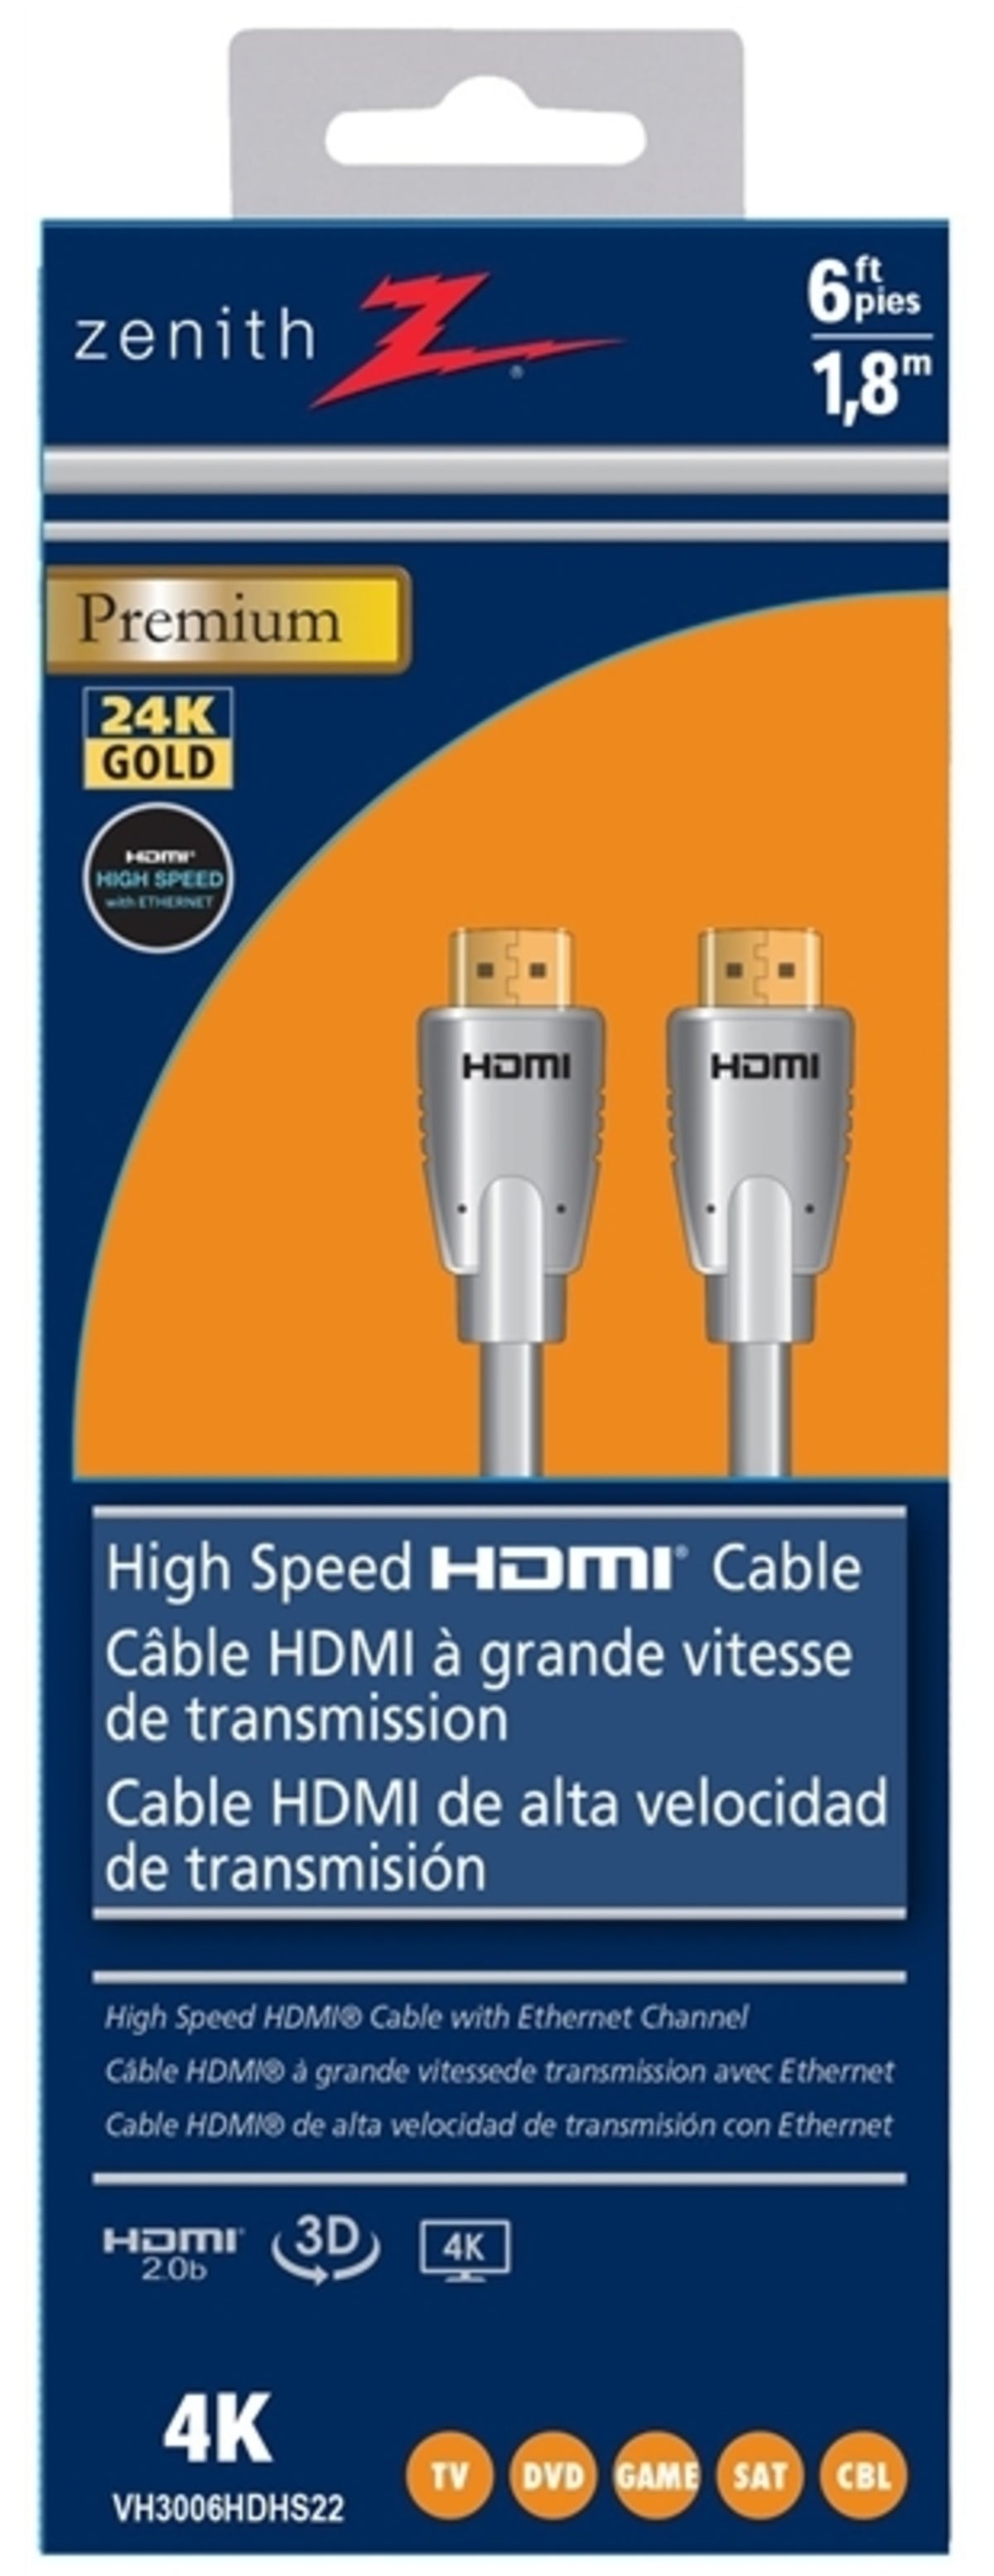 Zenith VH3006HDHS2 High Speed HDMI Cable, 6'